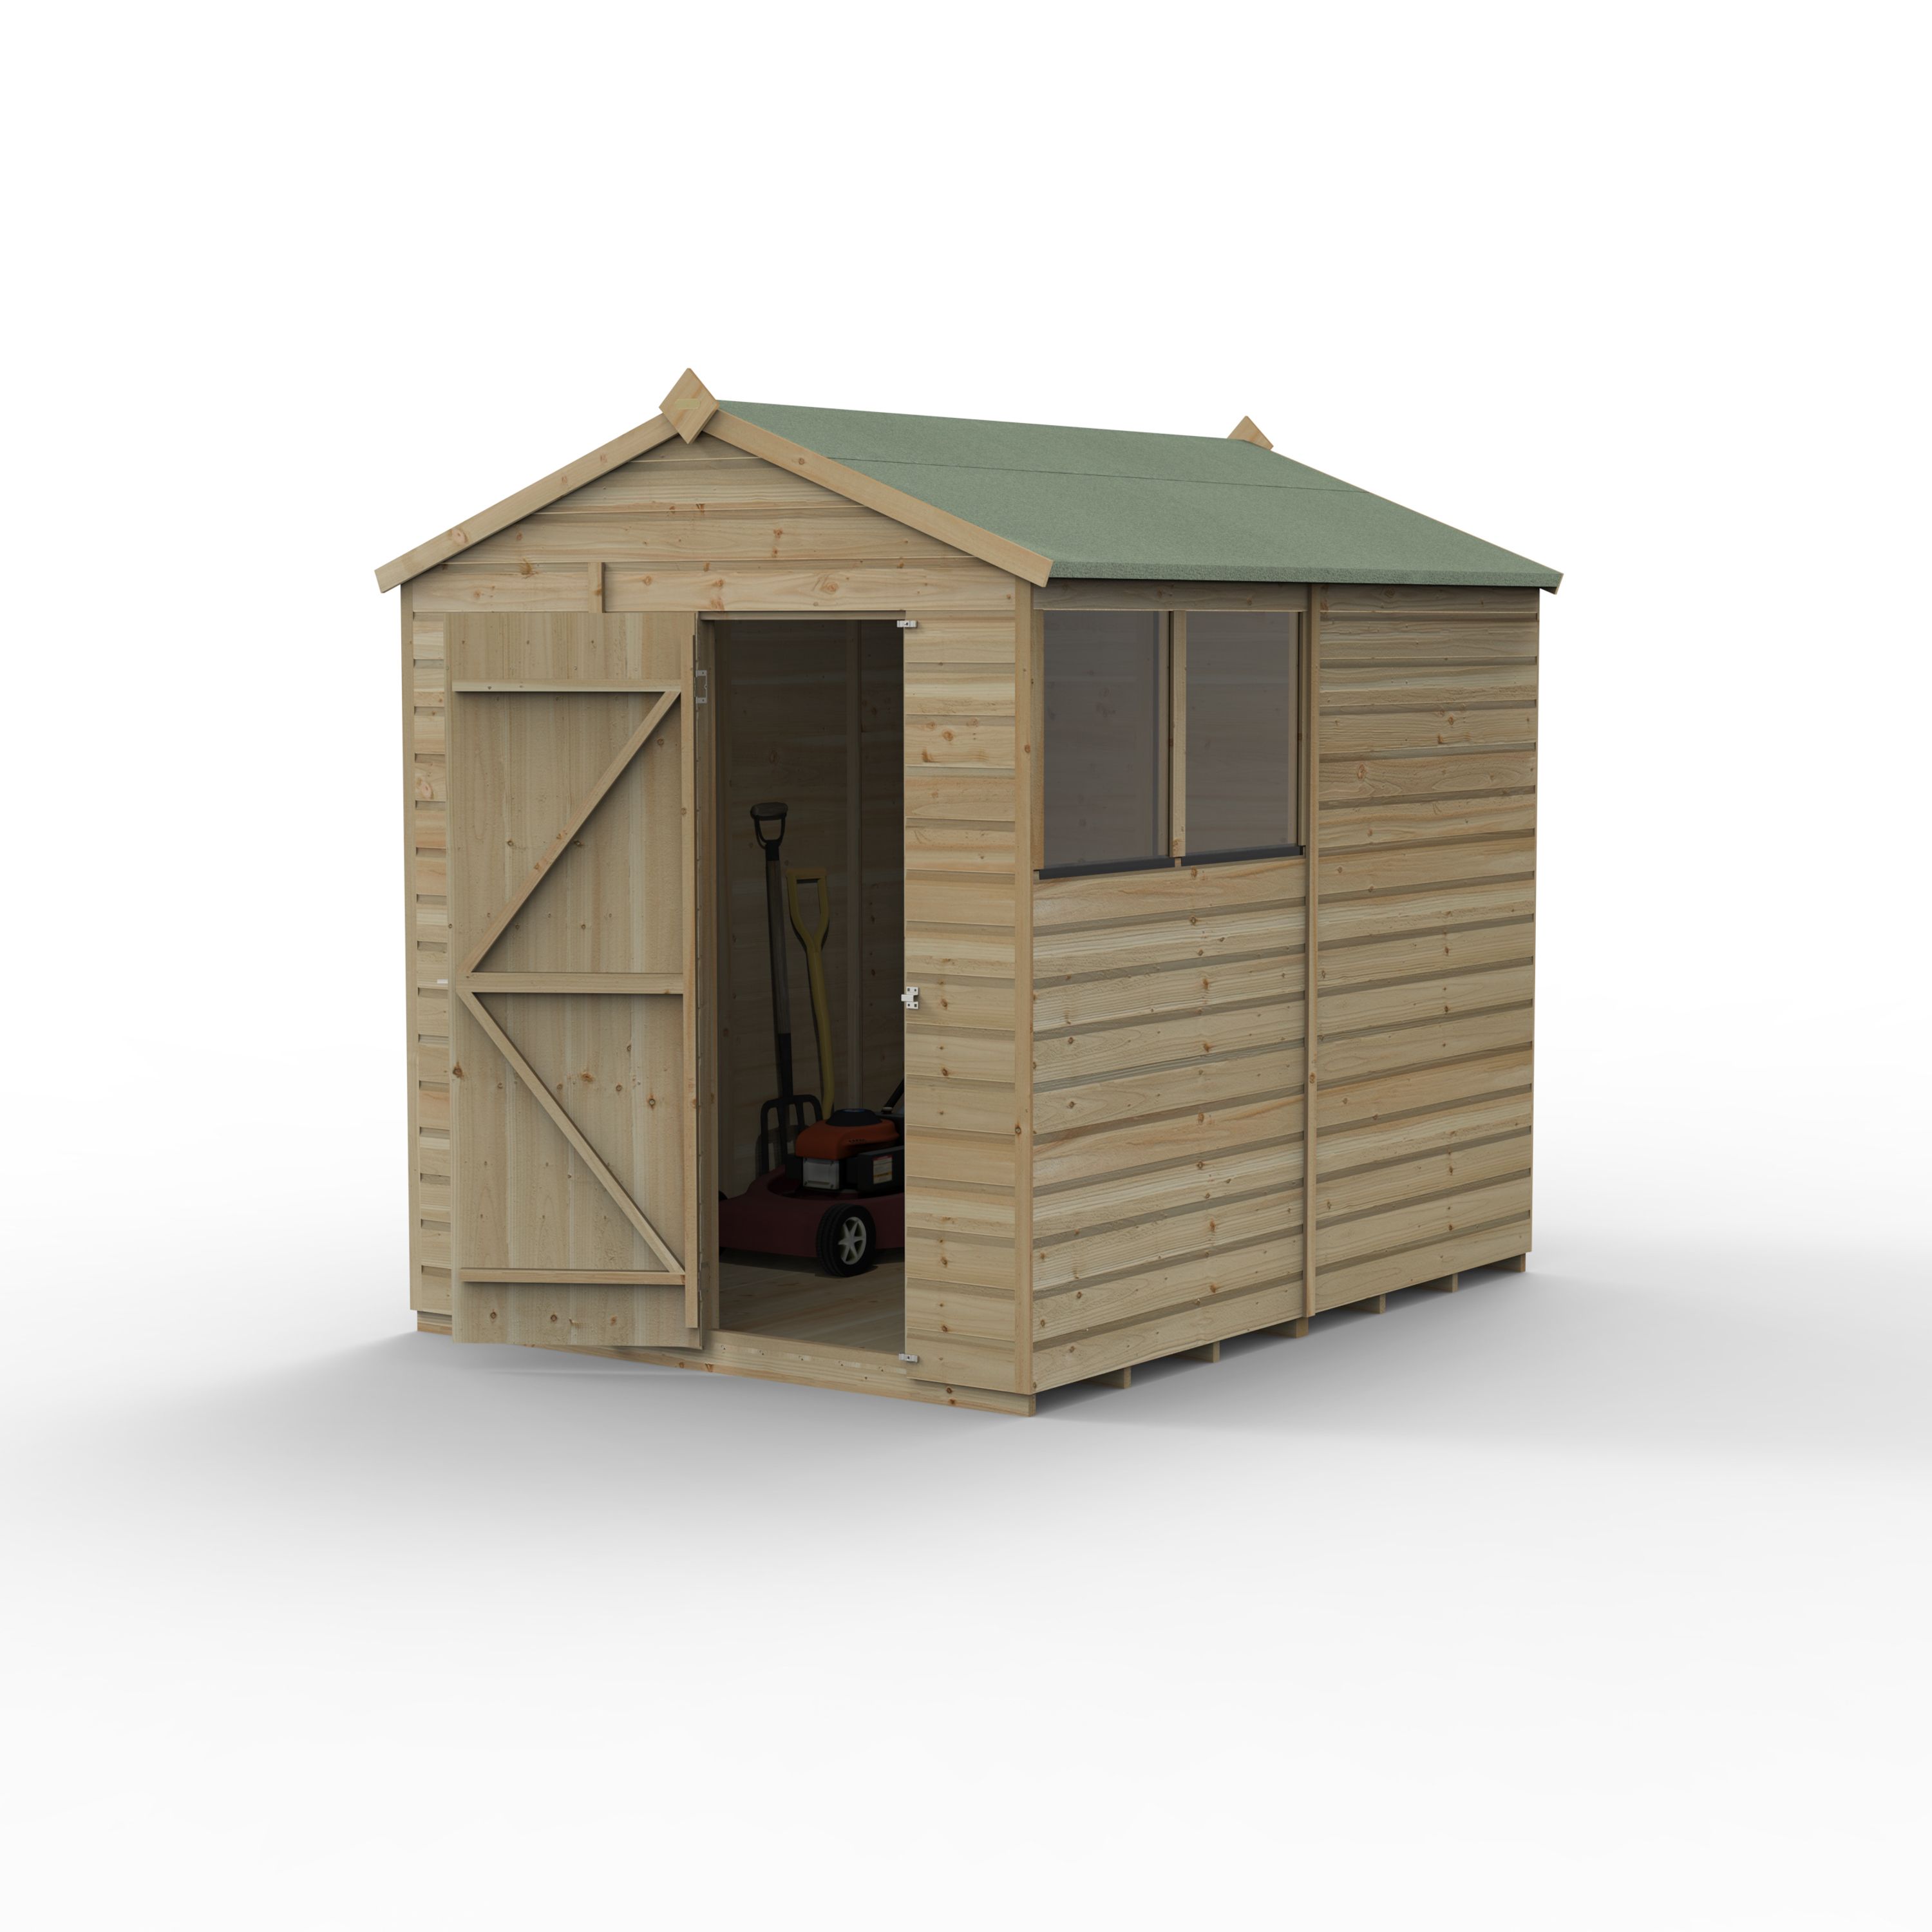 Forest Garden Beckwood 8x6 ft Apex Natural timber Wooden Shed with floor & 2 windows